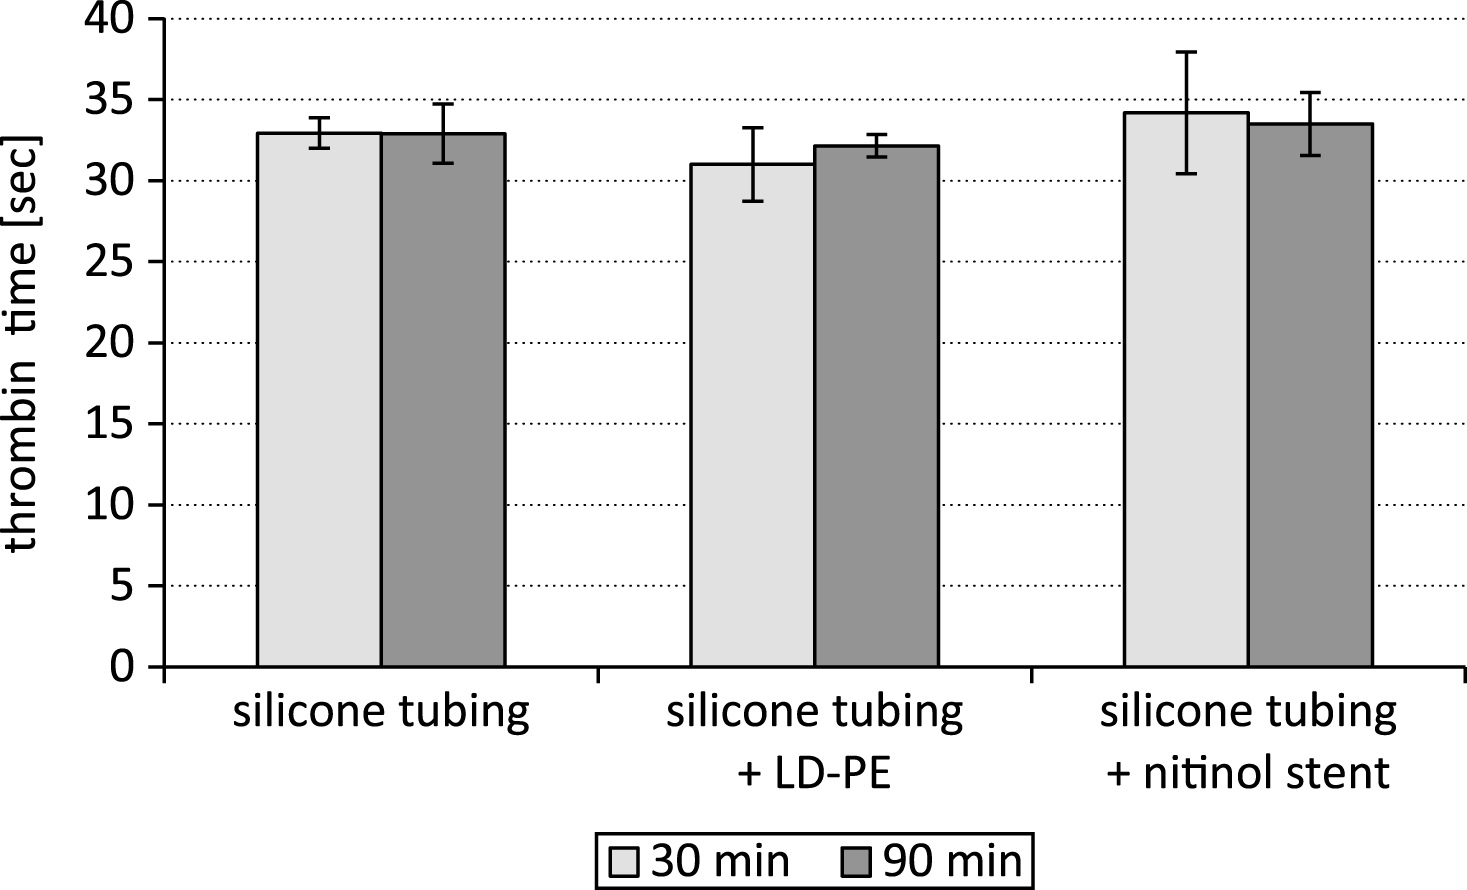 Thrombin time after testing a silicone tubing with integrated samples (LD-PE: low density polyethylene tube, nitinol stent) in a closed loop model; n = 6.